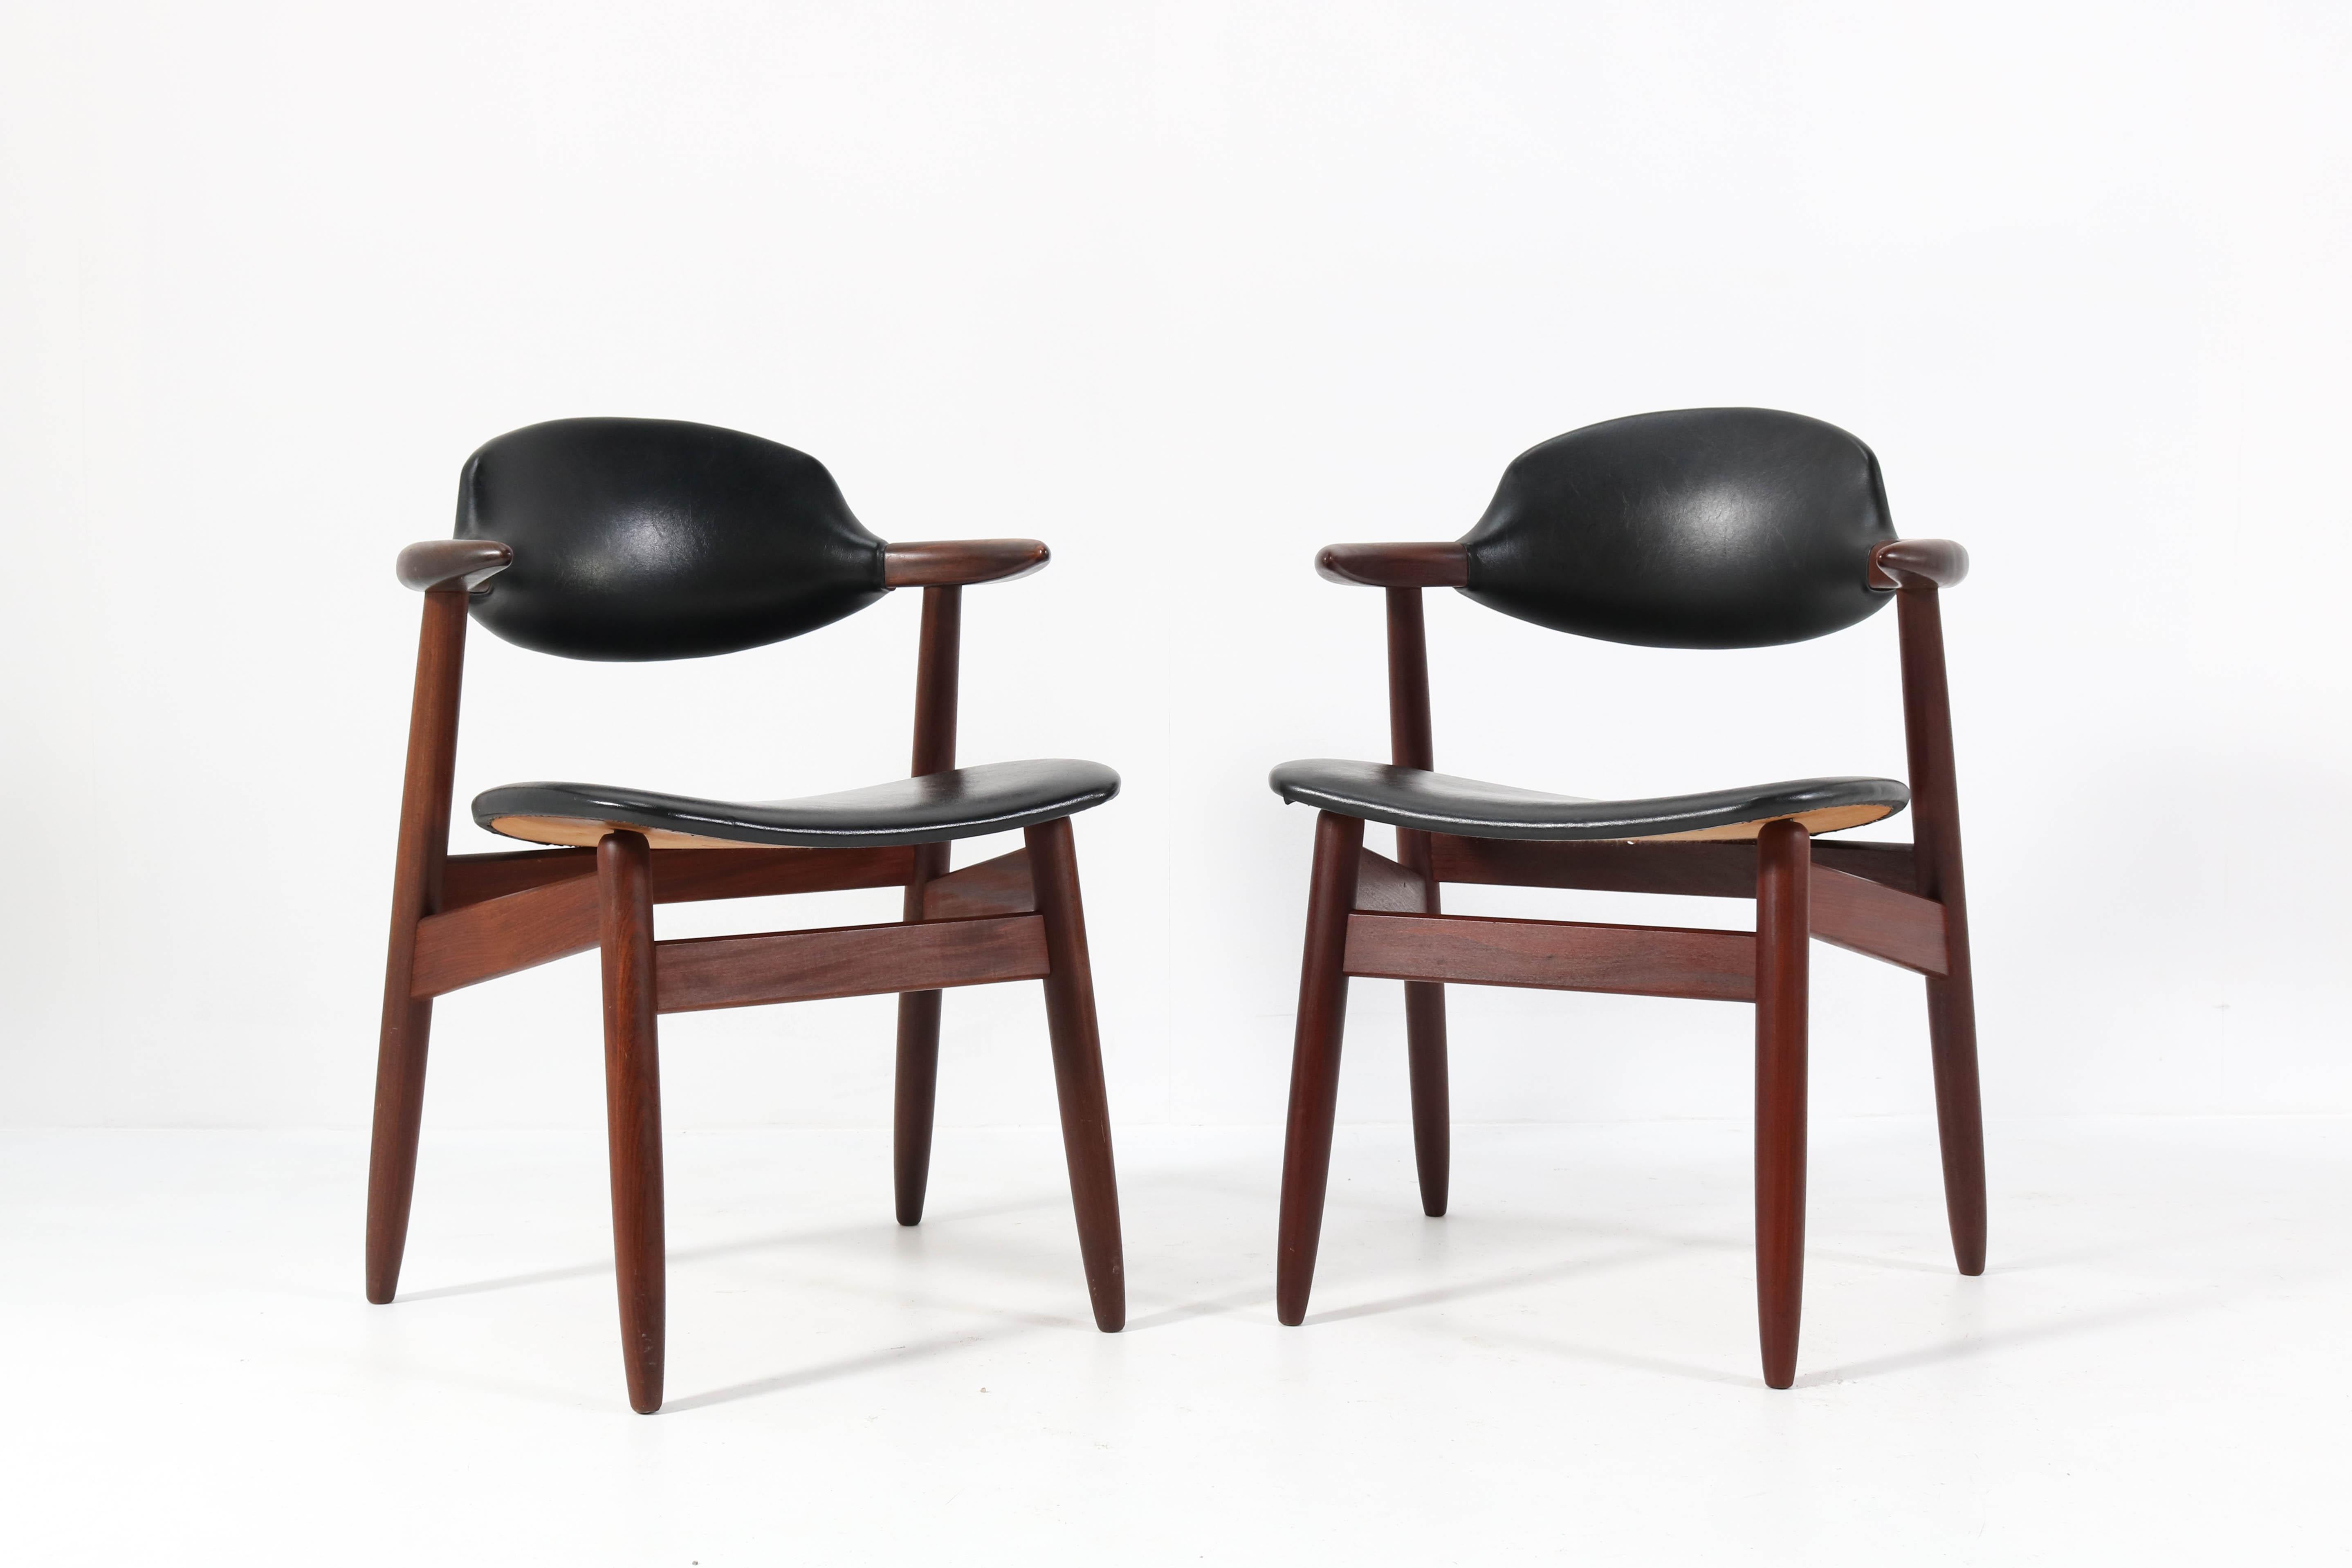 Dutch Two Mid-Century Modern Teak Cowhorn Chairs by Tijsseling for Hulmefa, 1960s For Sale